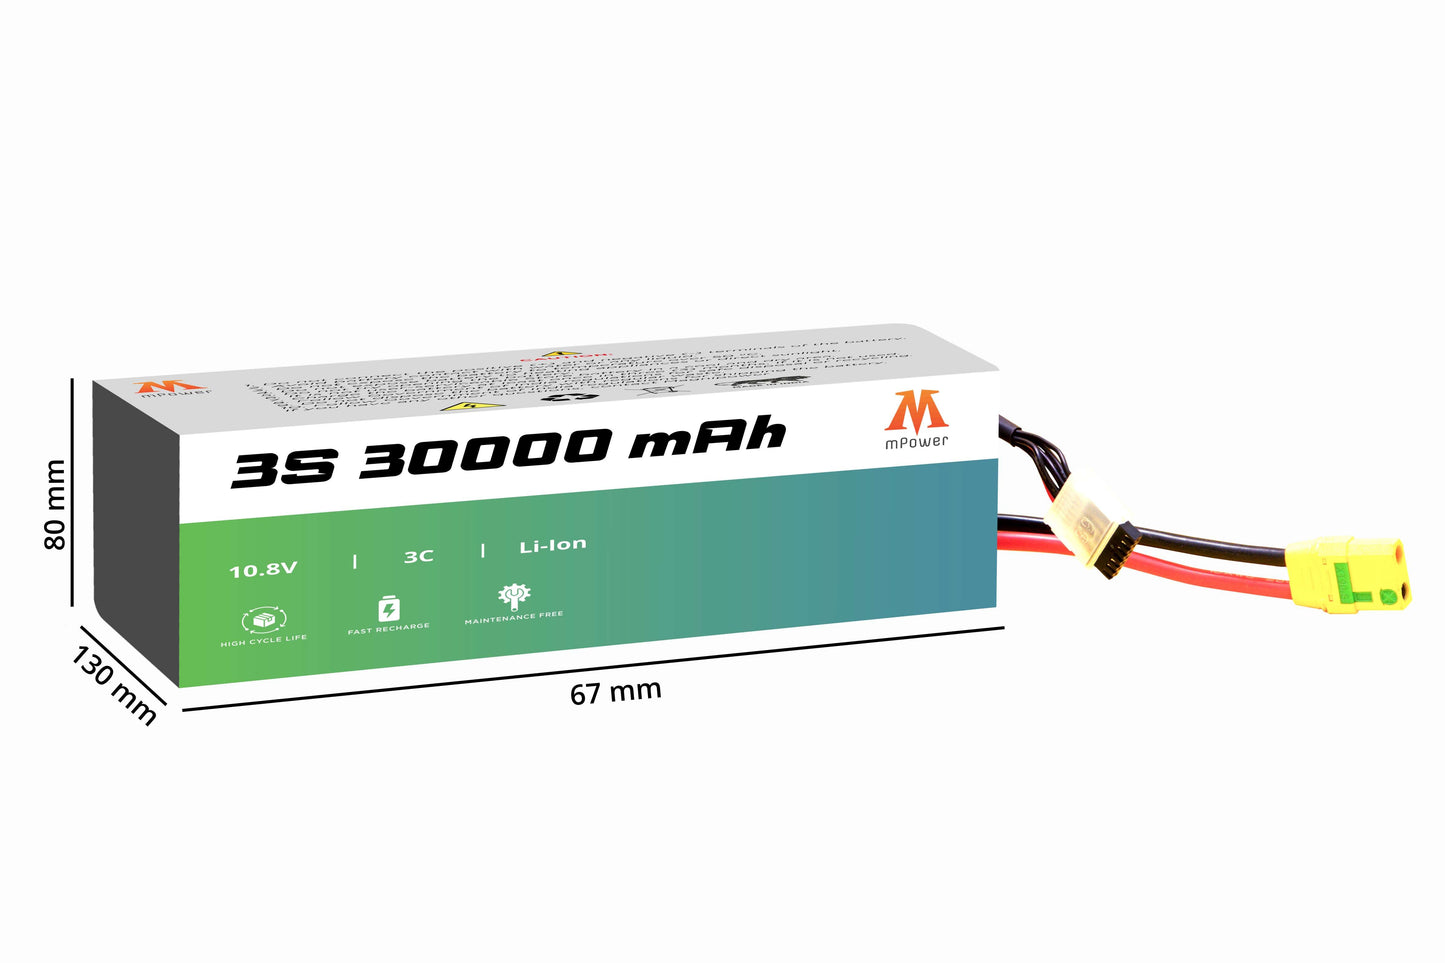 mPower 3S 30000mah 3C Lithium-Ion Battery for Survey Drones